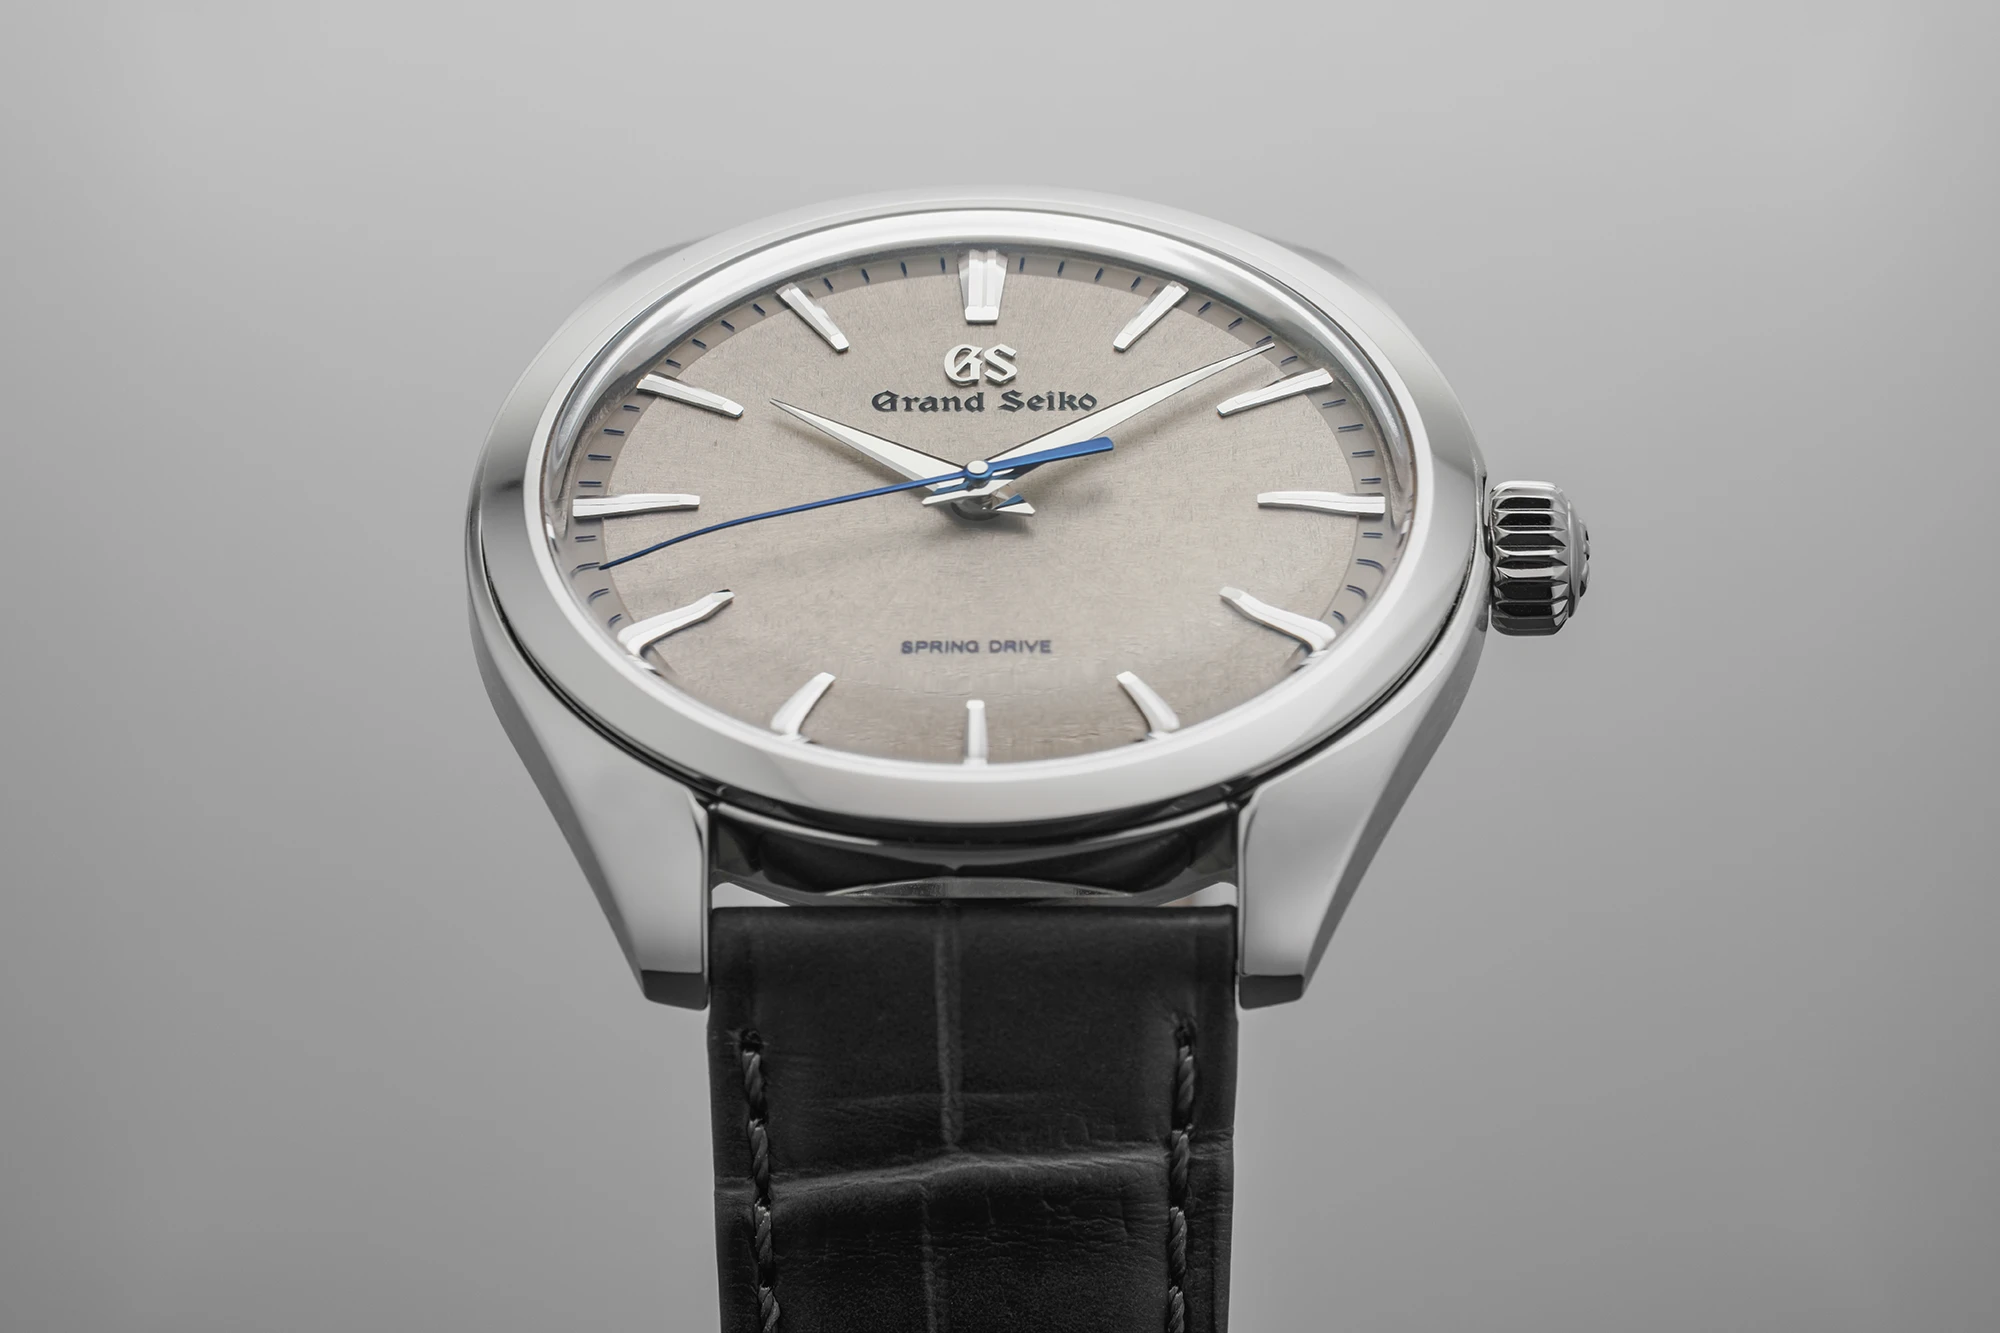 Grand Seiko SGY023 watch with Spring Drive and Grey Dial.